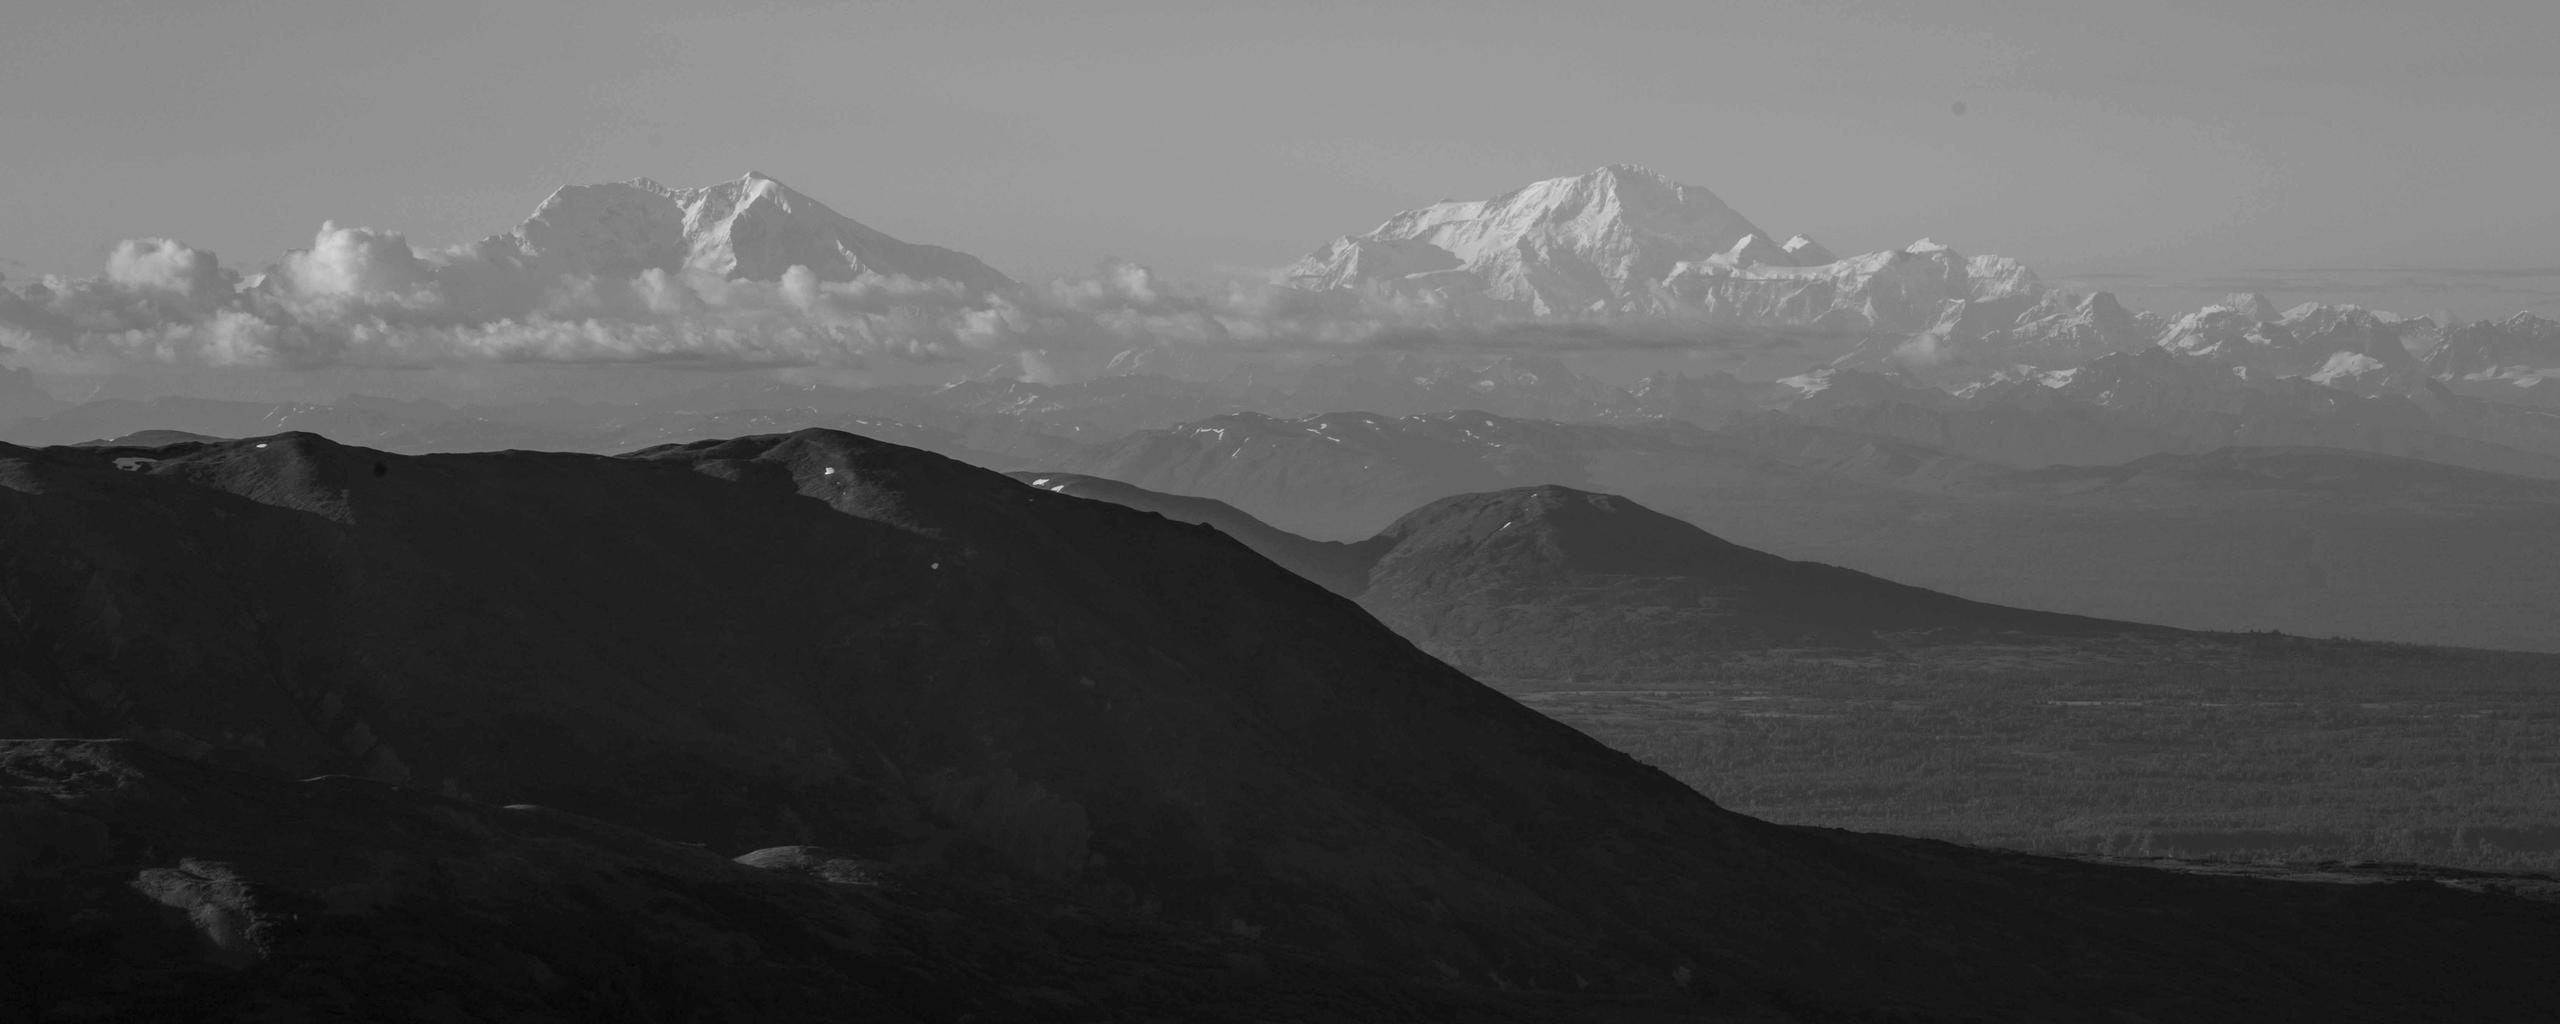 Black and white photo of Alaskan mountain landscape from aerial view